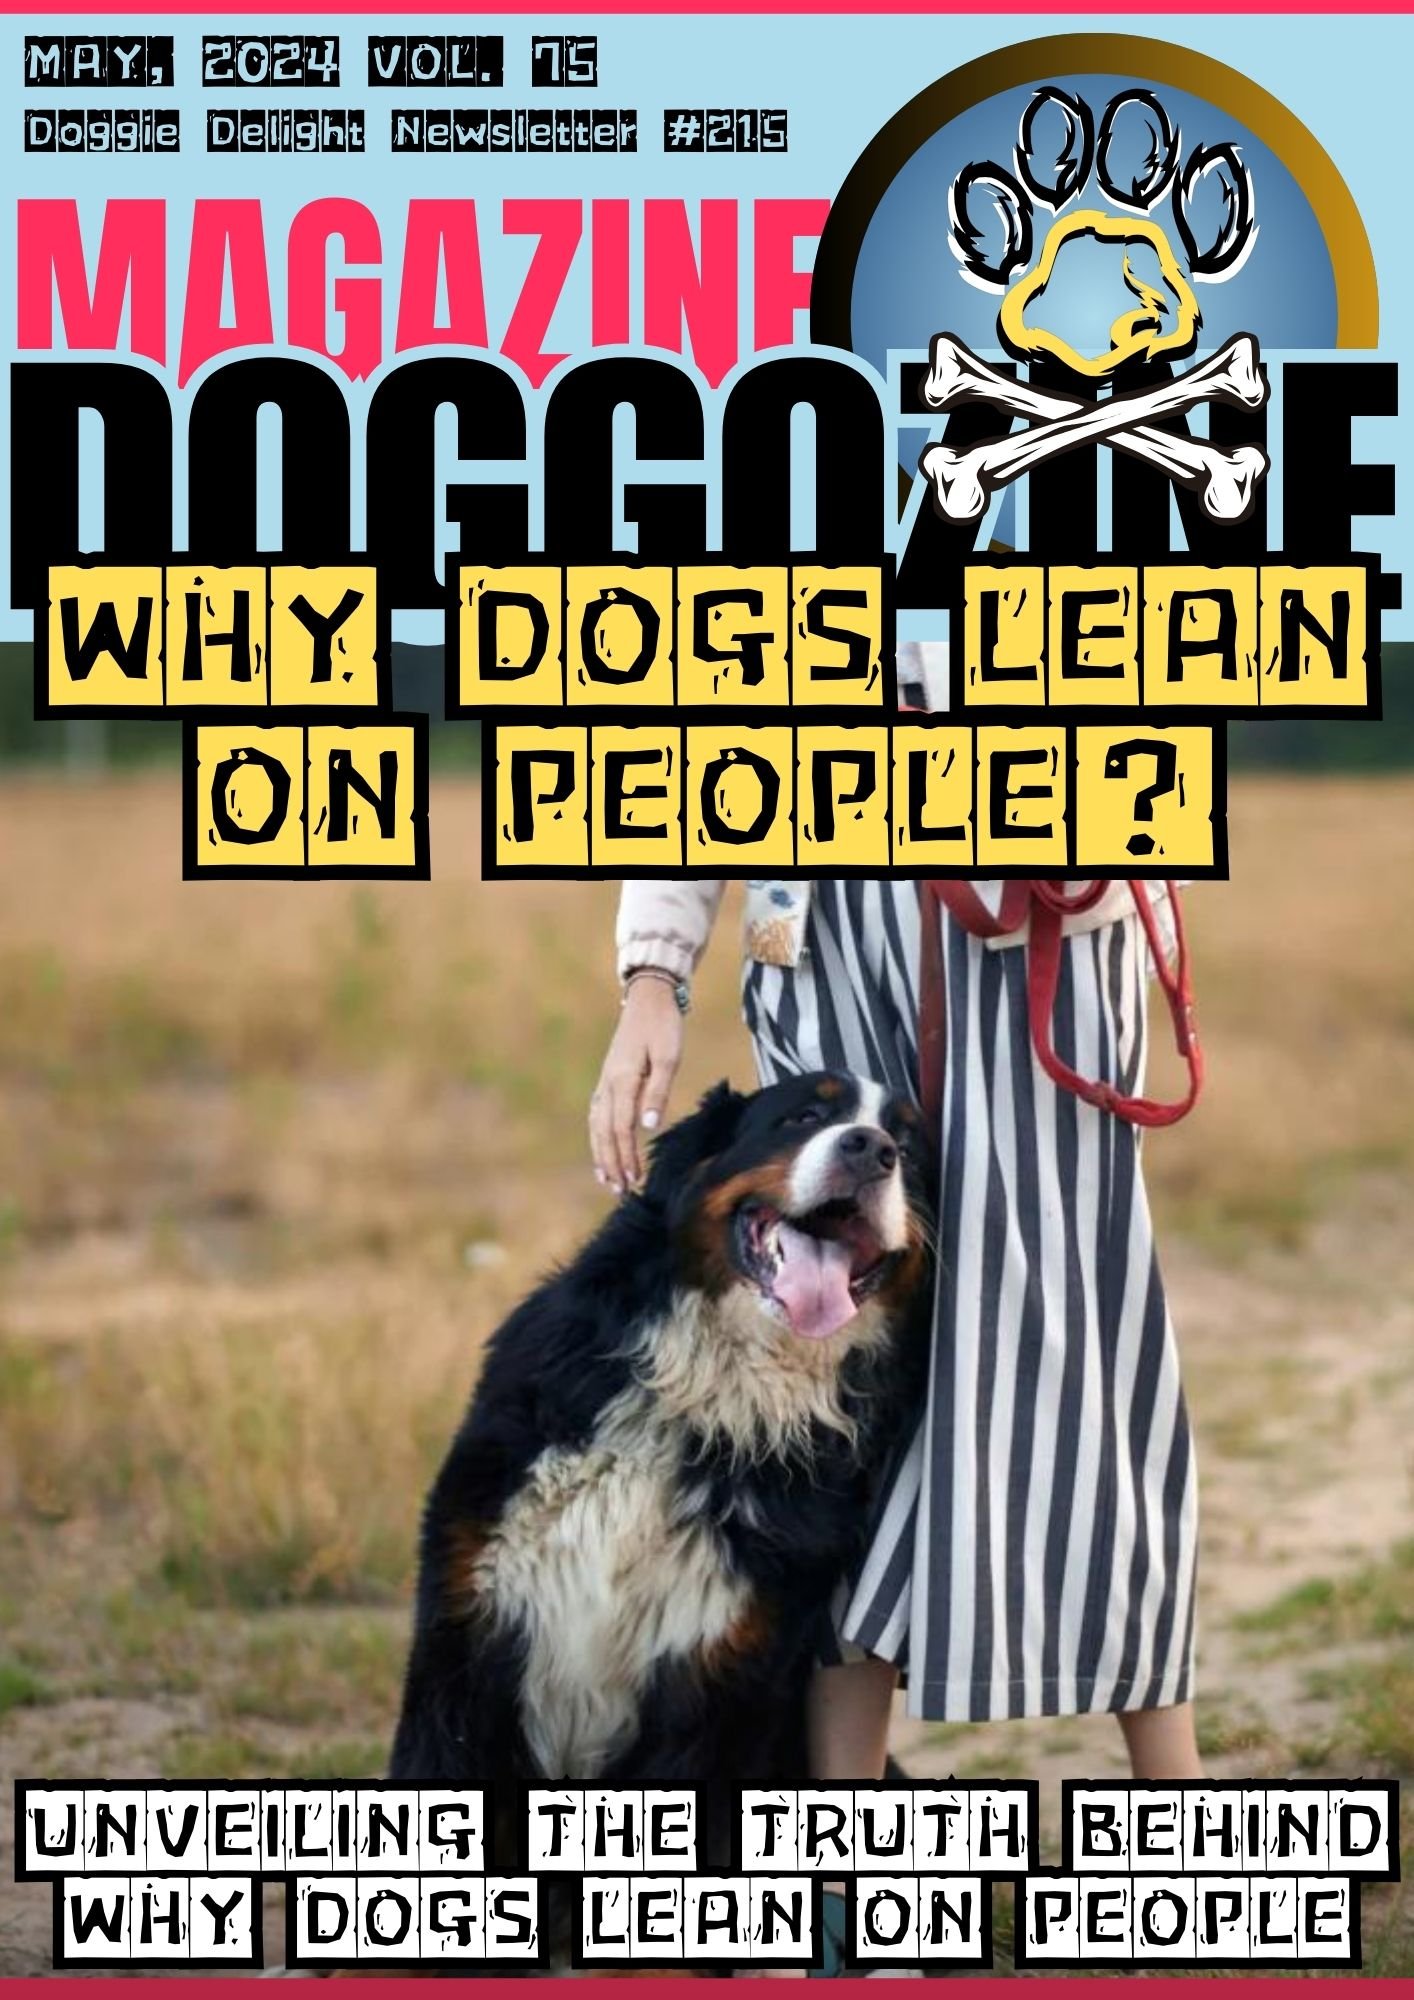 WHY DOGS LEAN ON PEOPLE